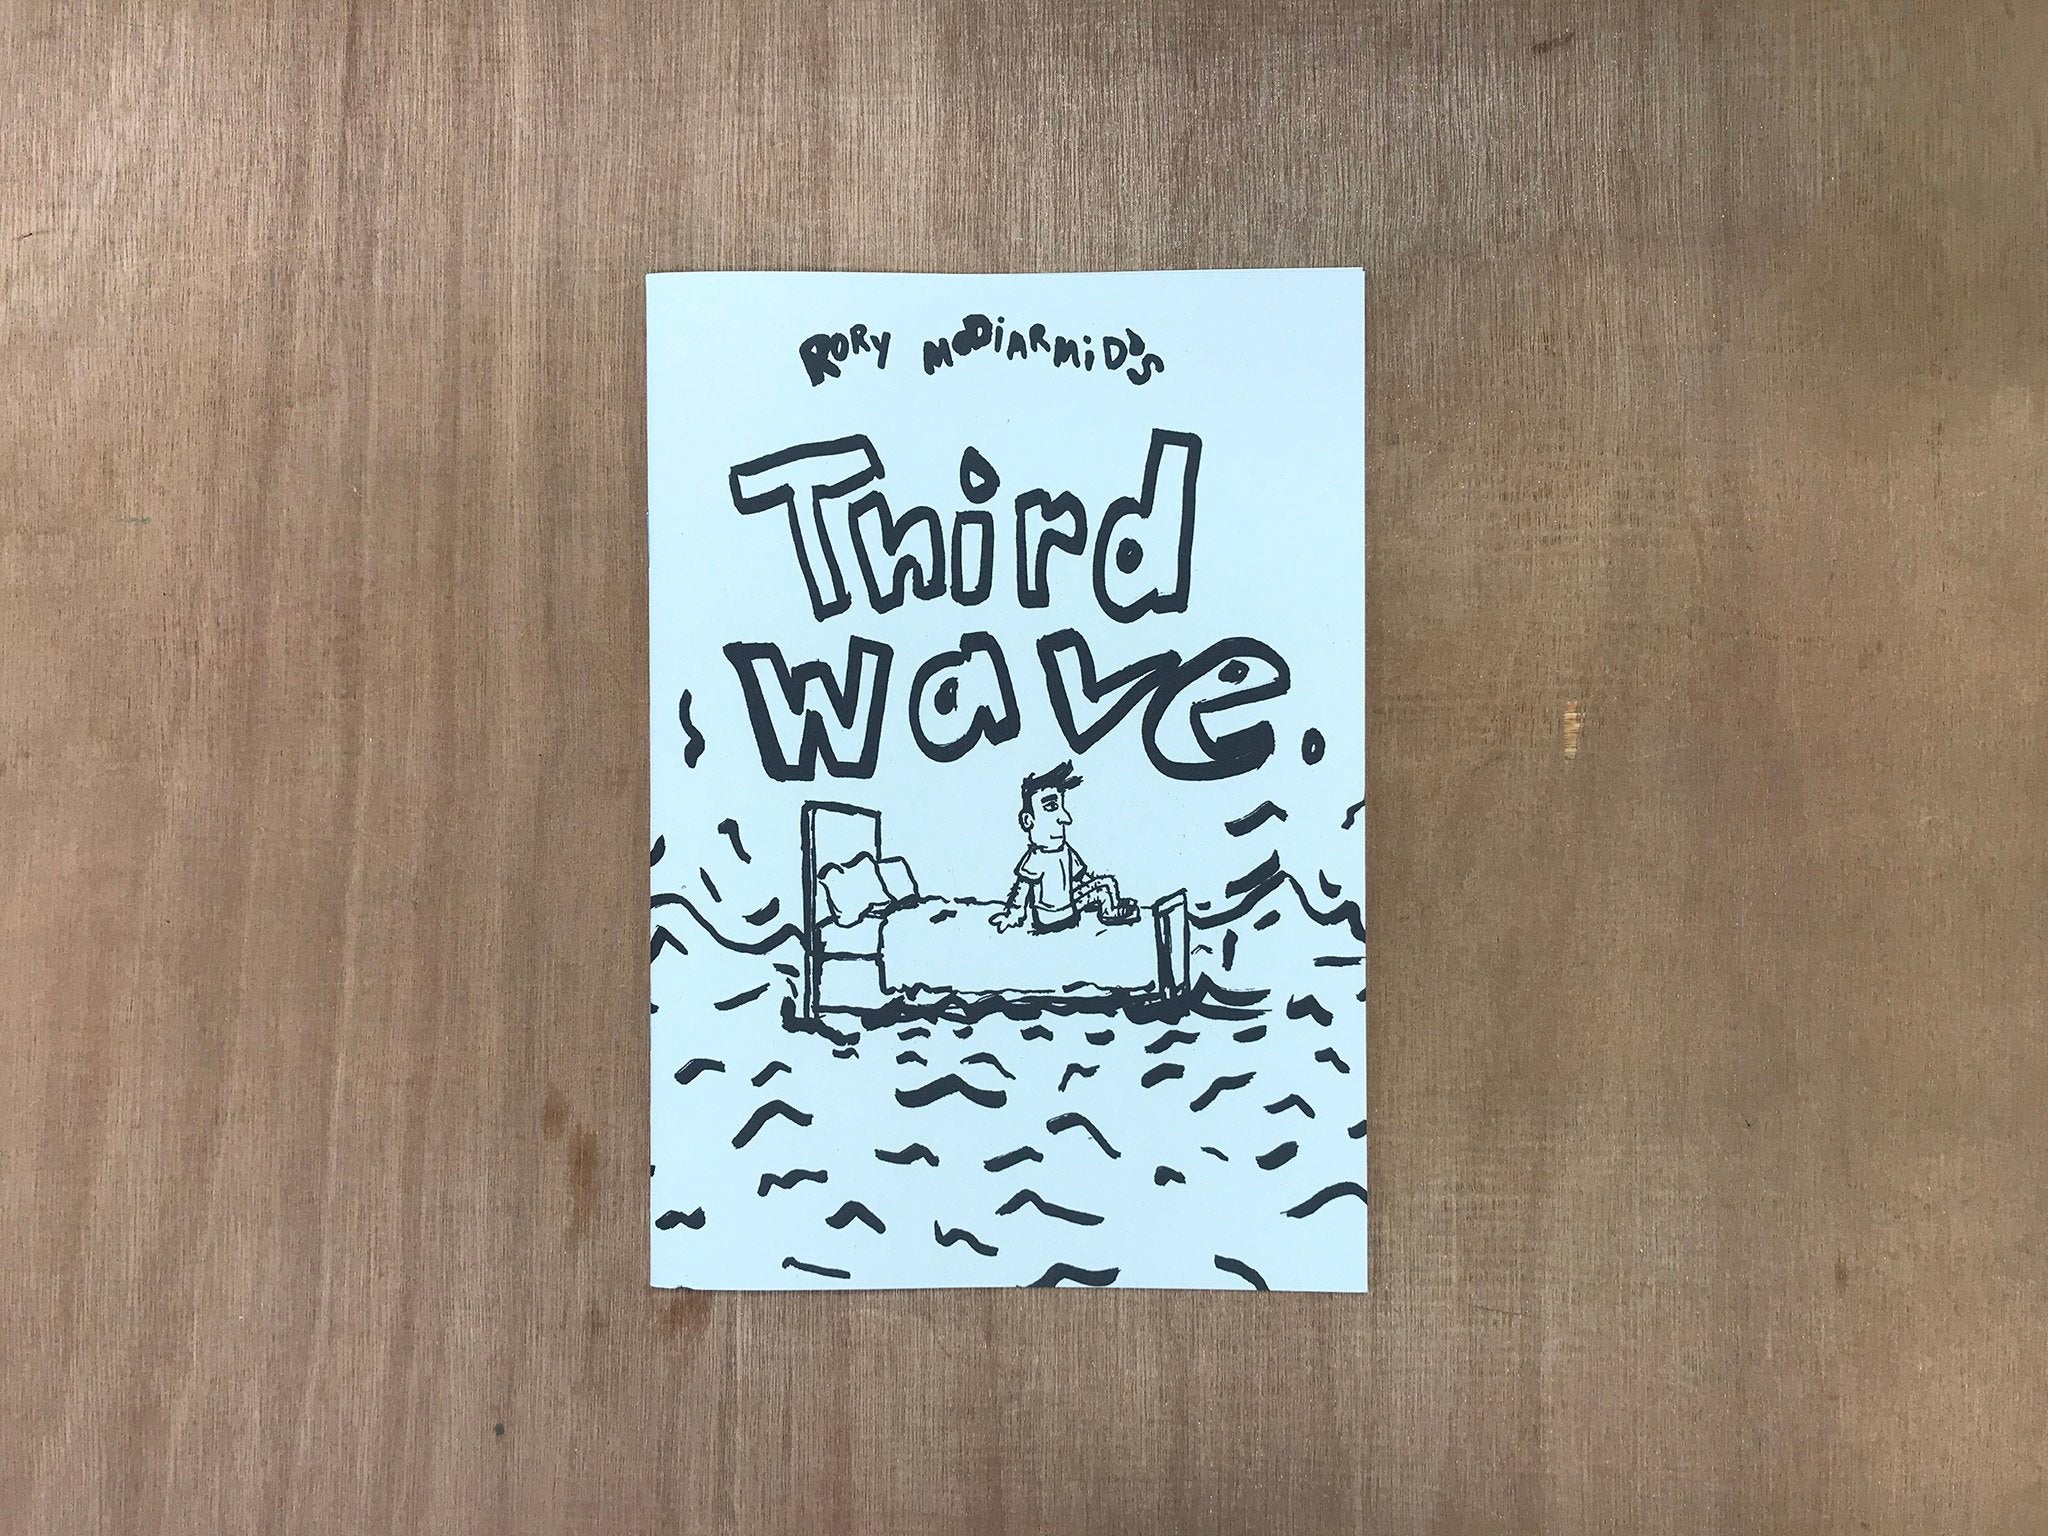 THIRD WAVE by Rory McDiarmid